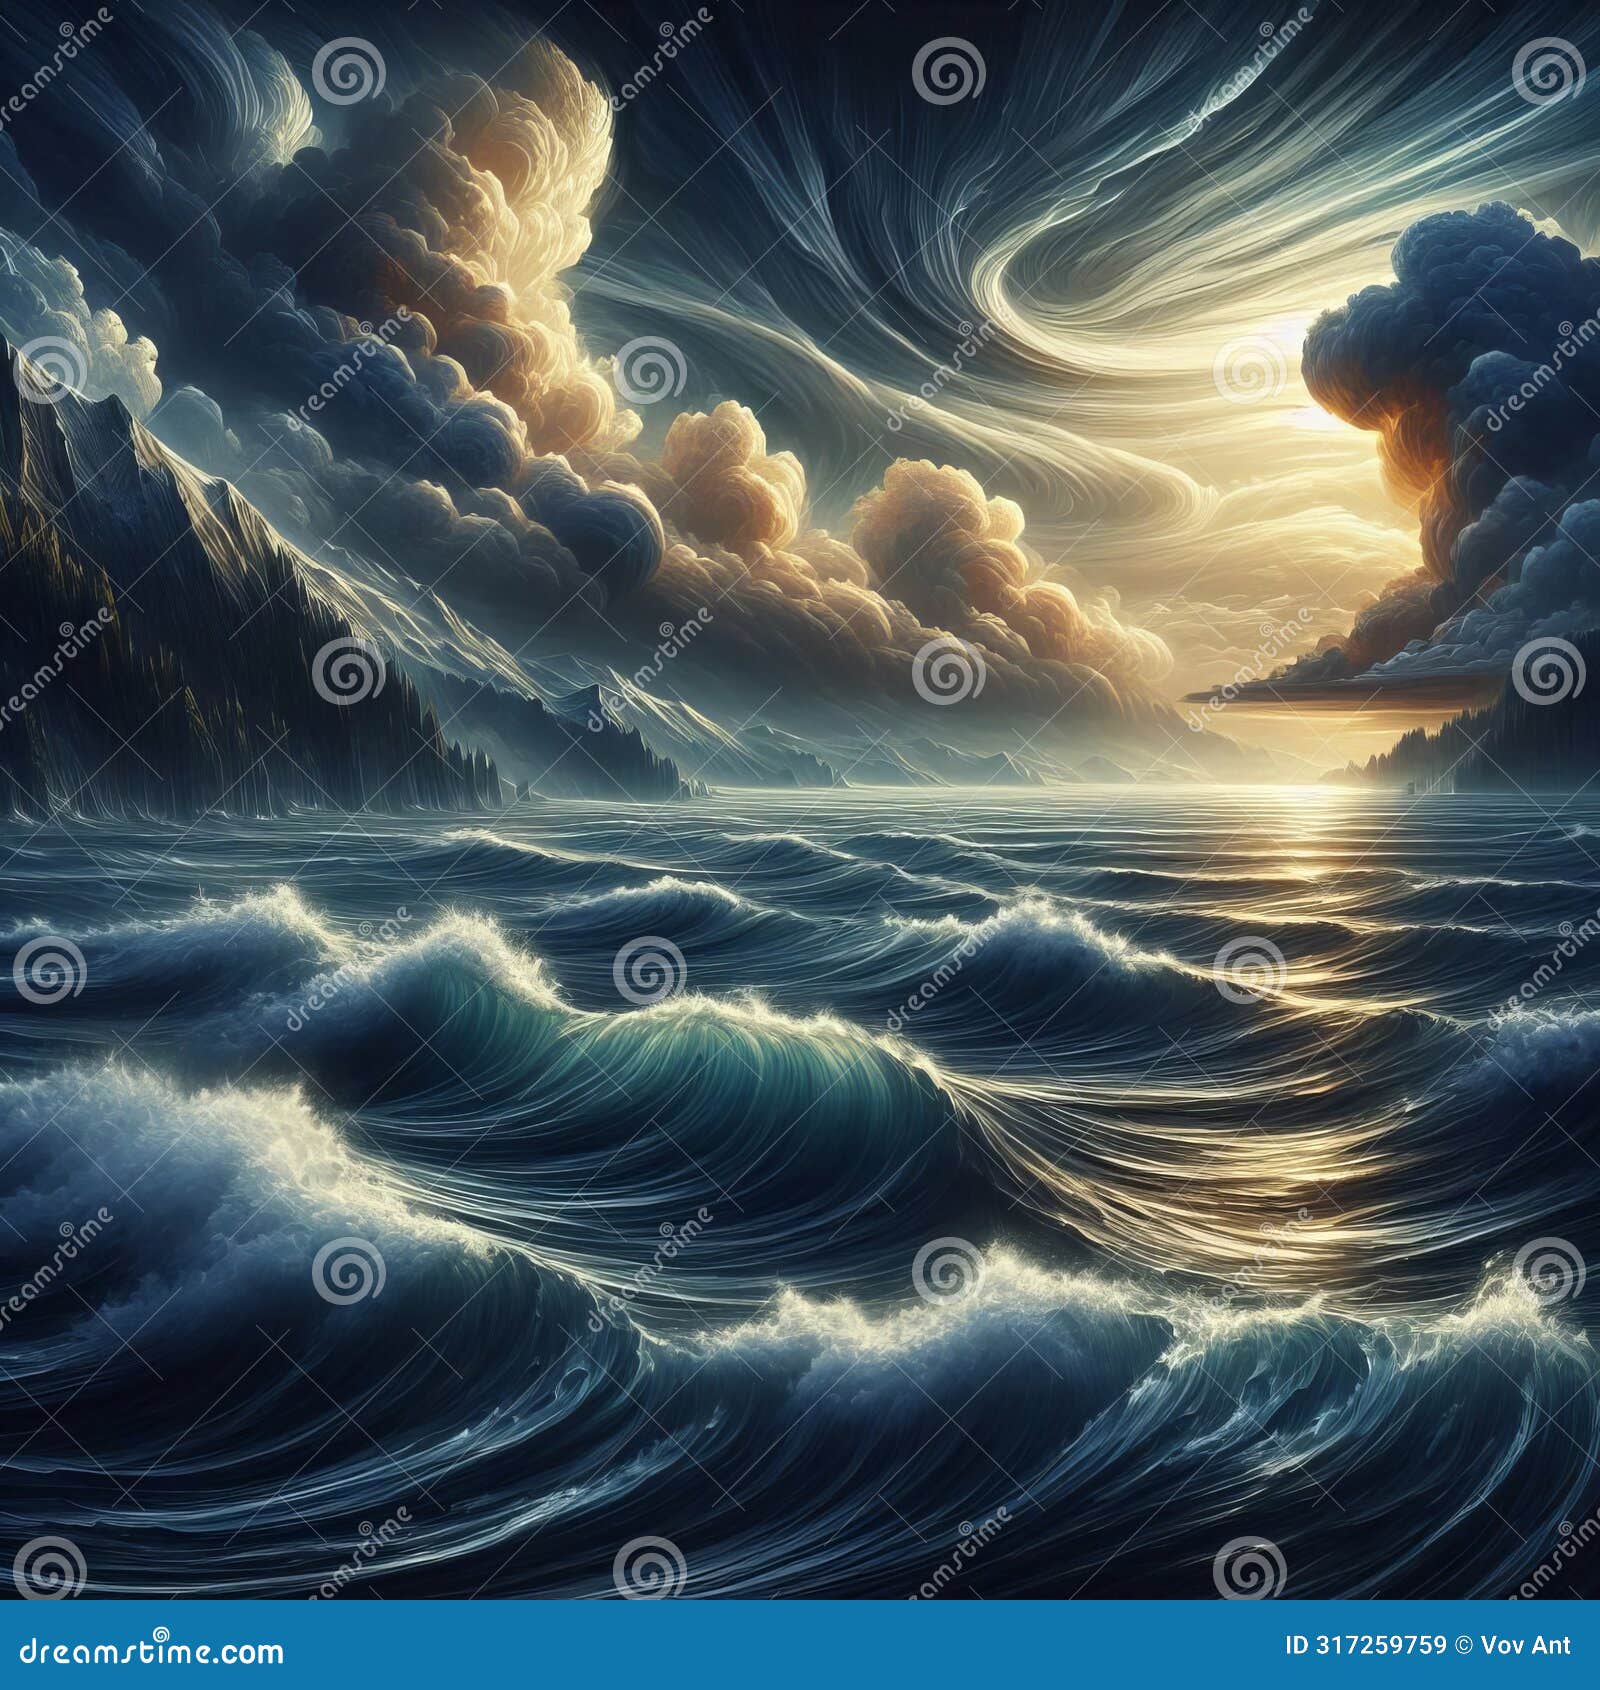 artistic interpretation of a stormy sea with dramatic waves 